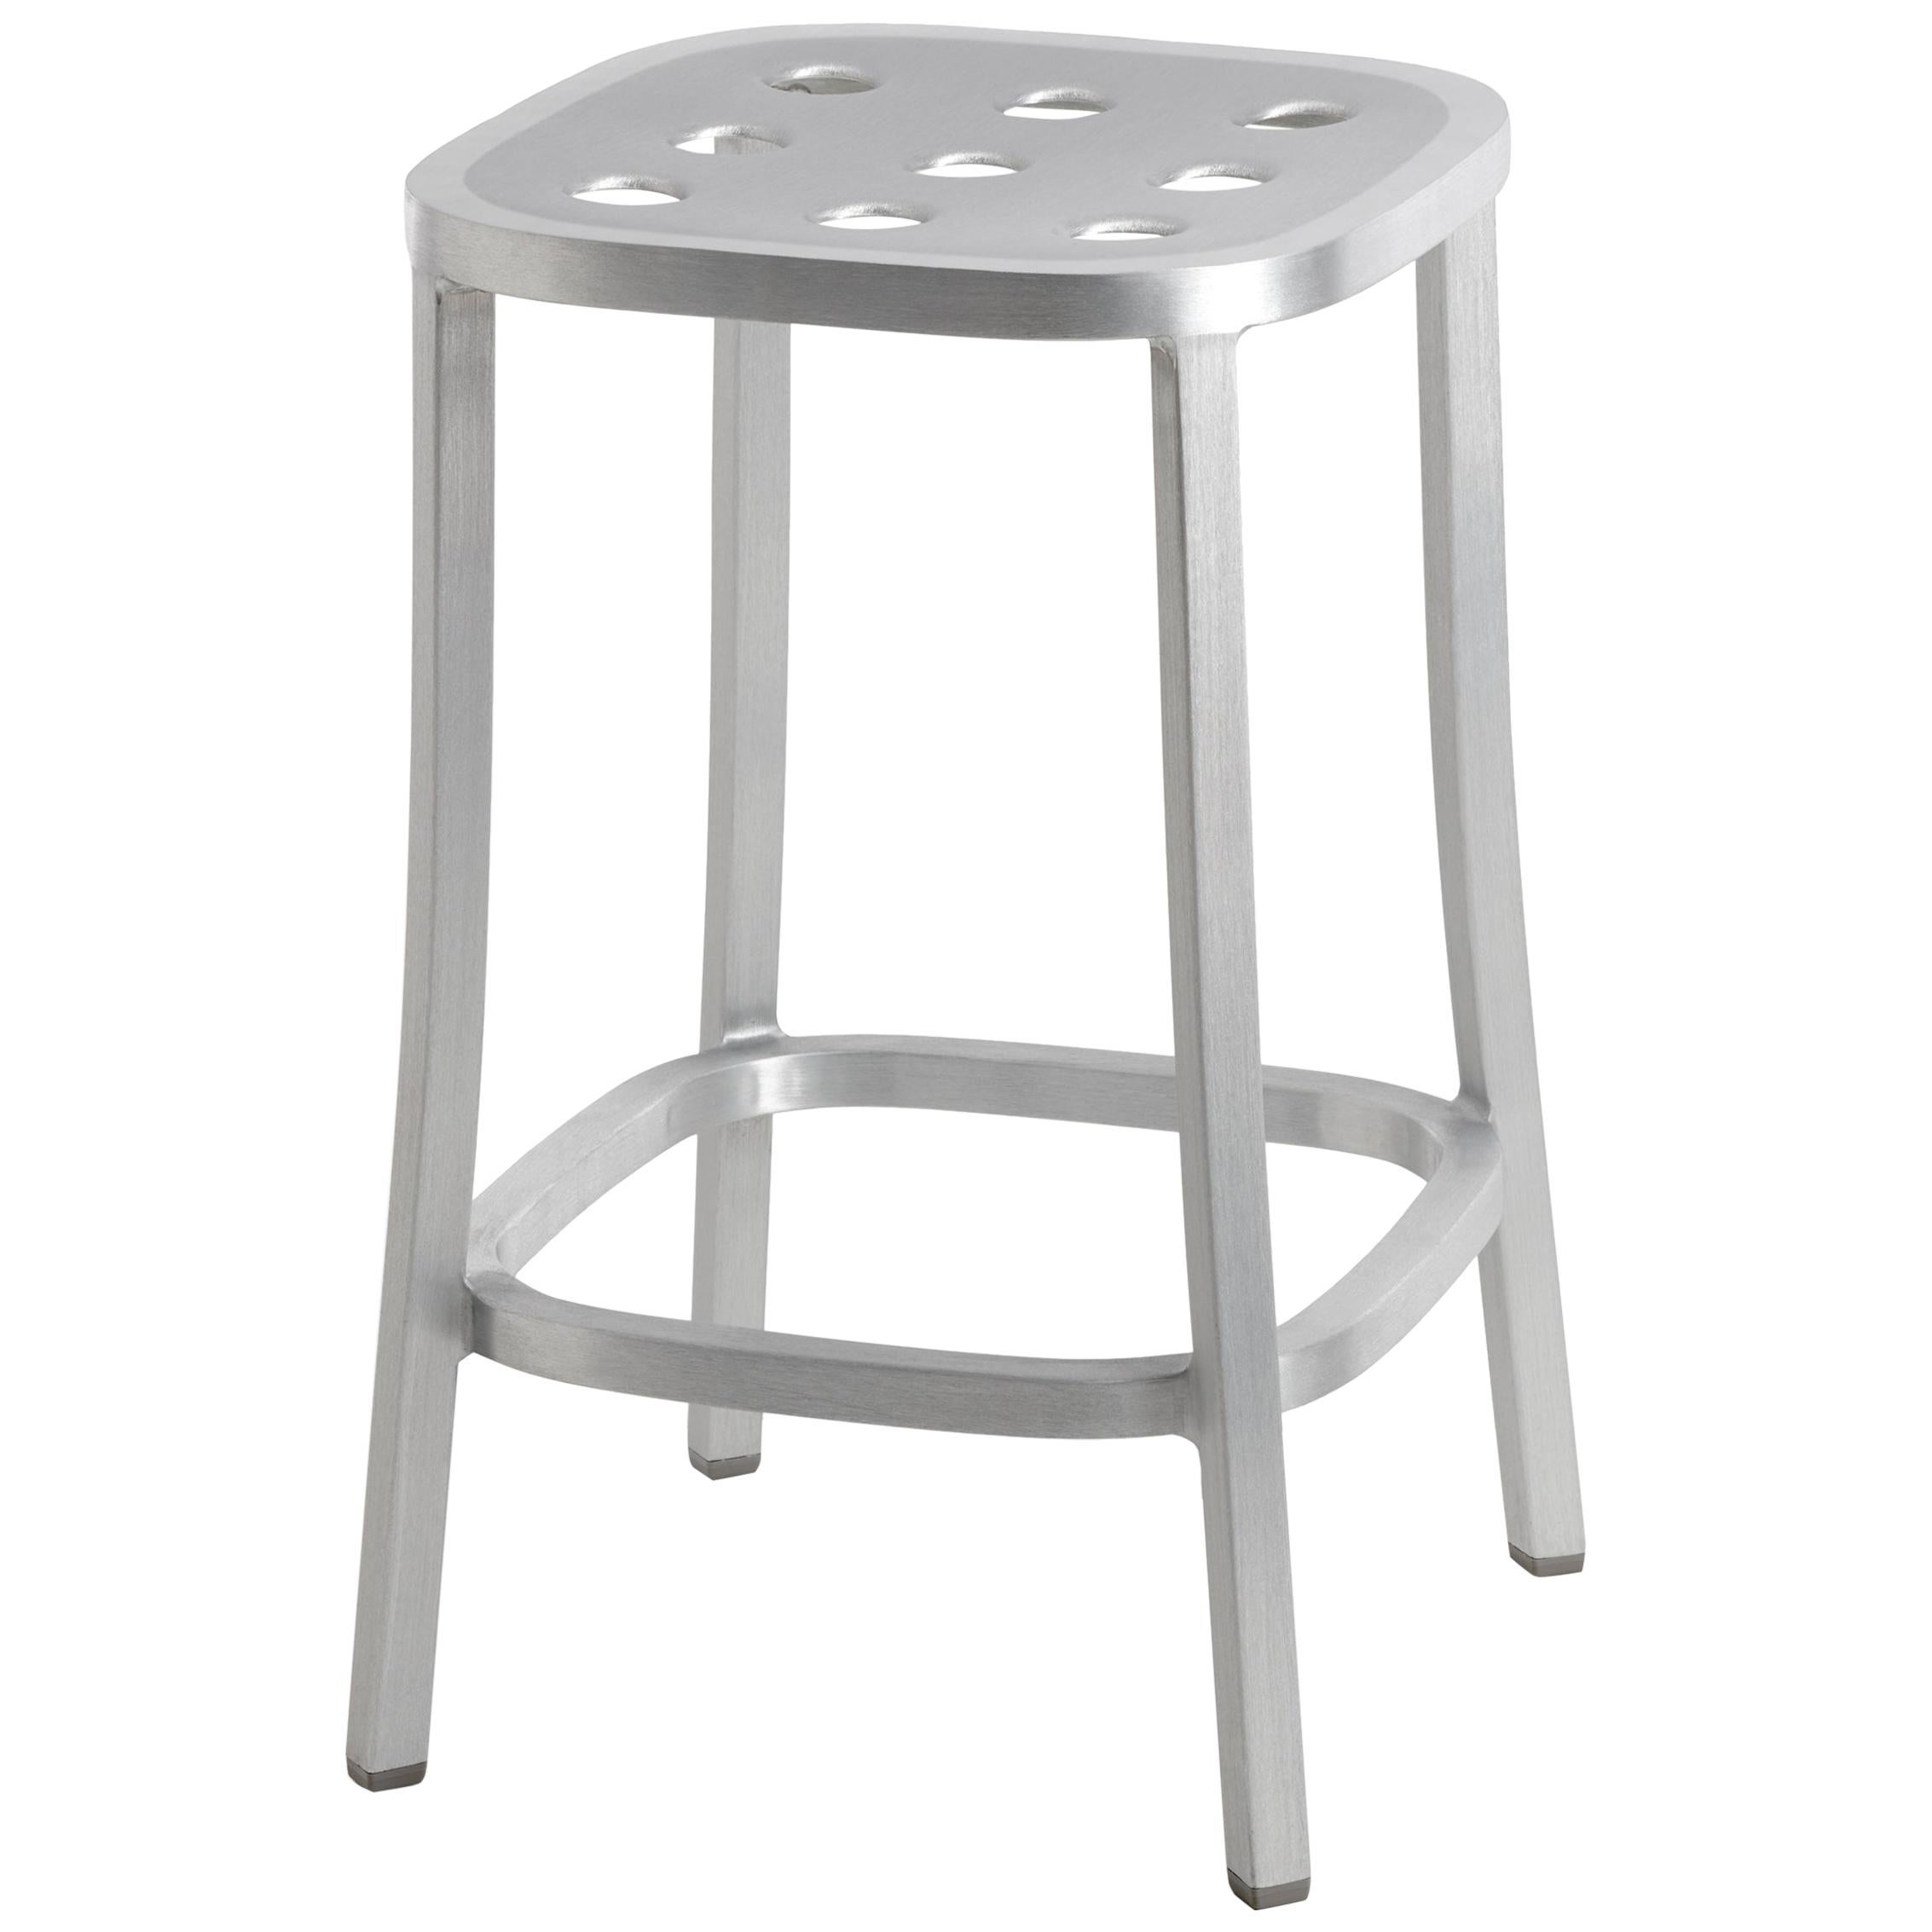 Emeco 1 Inch All Aluminum Counter Stool by Jasper Morrison, 1stdibs Exclusive